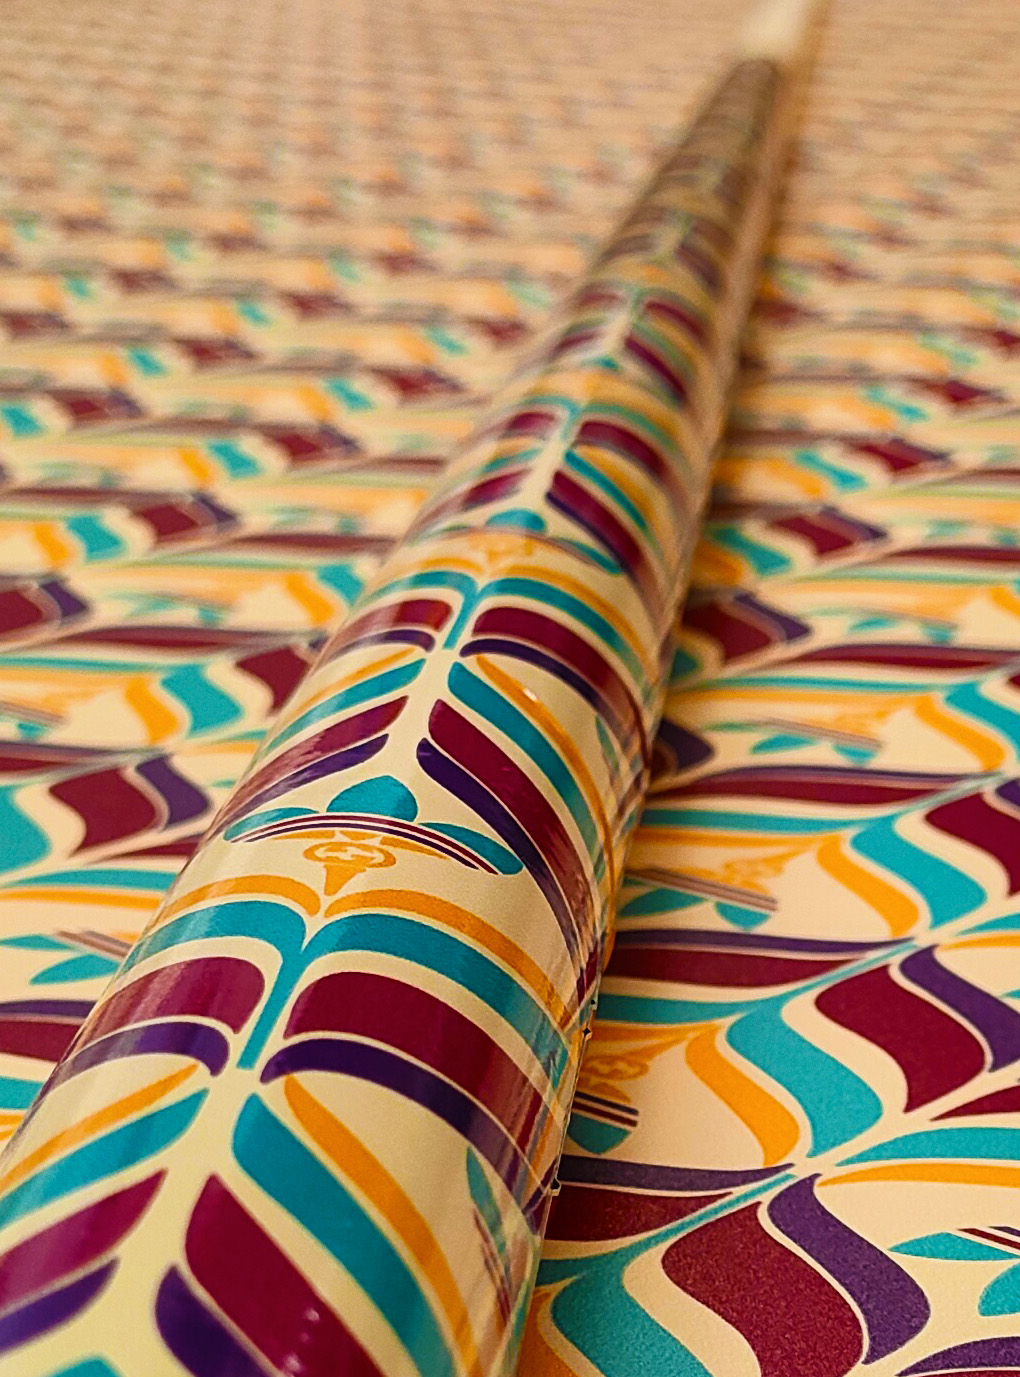 Pool cue wrapped in bespoke Gucci x Adidas Retro Tile